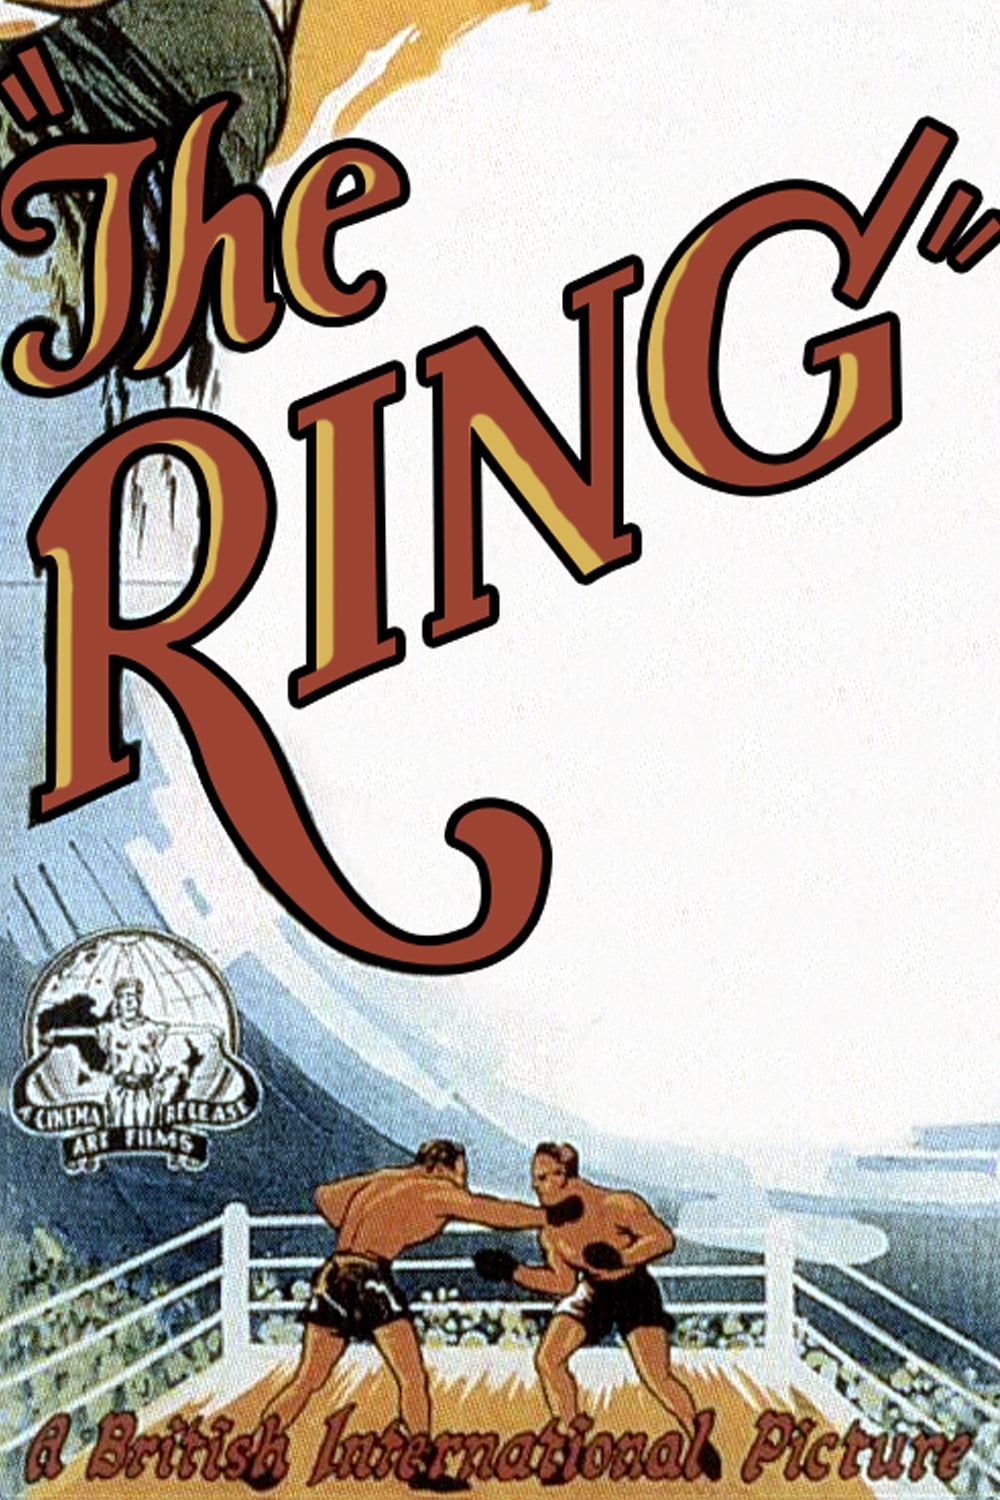 RING definition and meaning | Collins English Dictionary